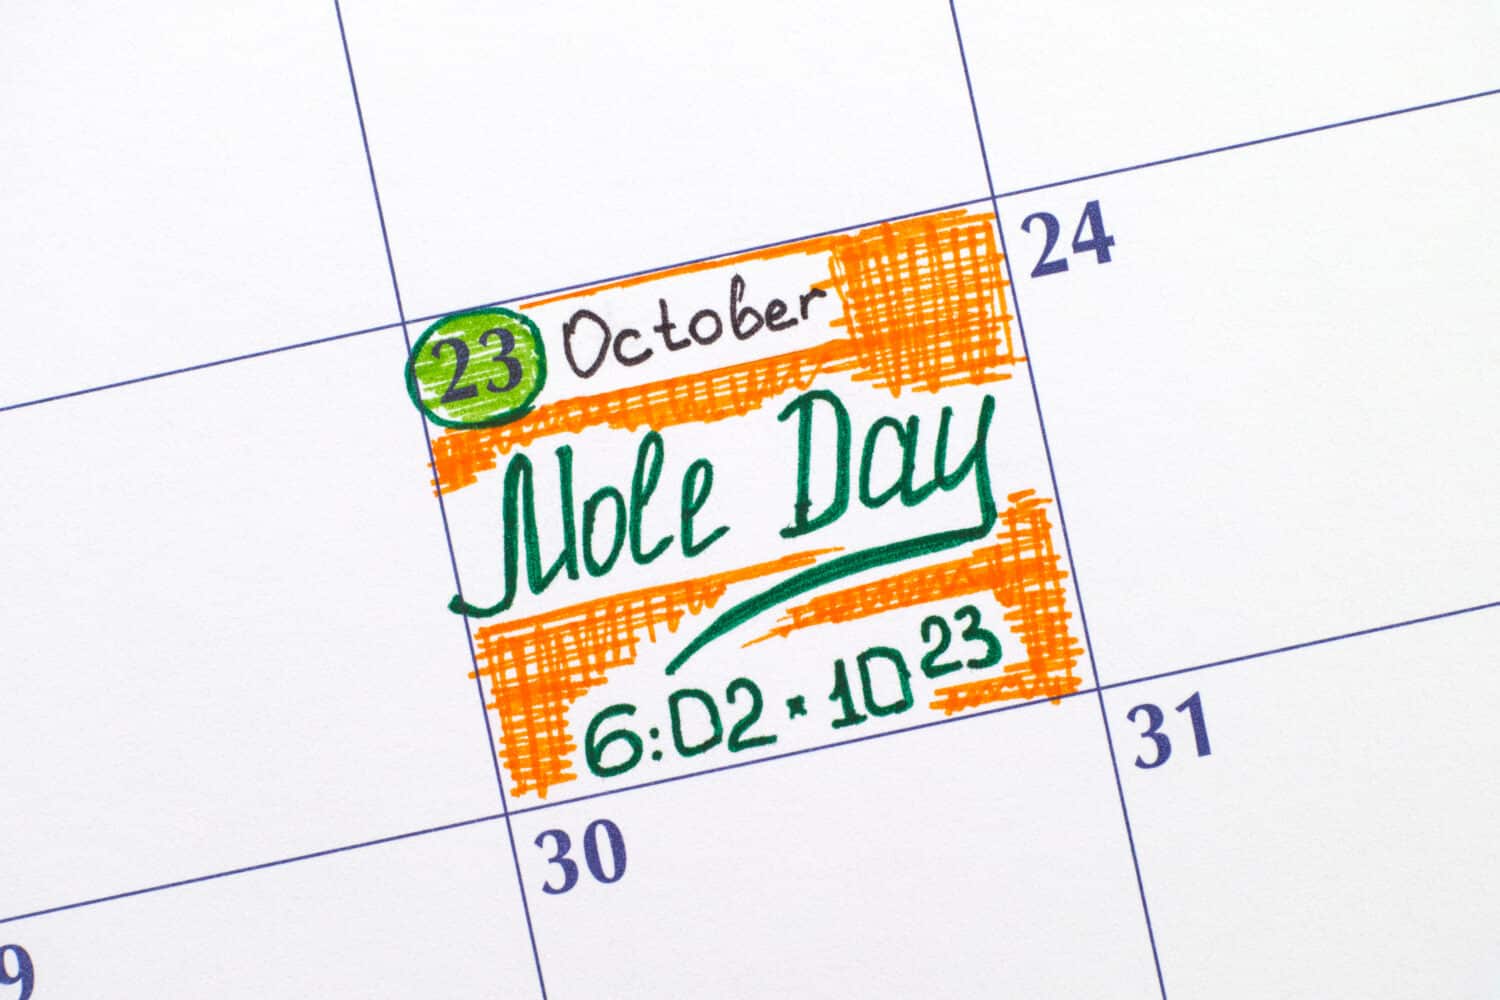 Reminder Mole Day in calendar. Mole Day is an unofficial holiday celebrated among chemists on October 23, between 6-02 AM and 6-02 PM. The time and date are derived from Avogadros number.